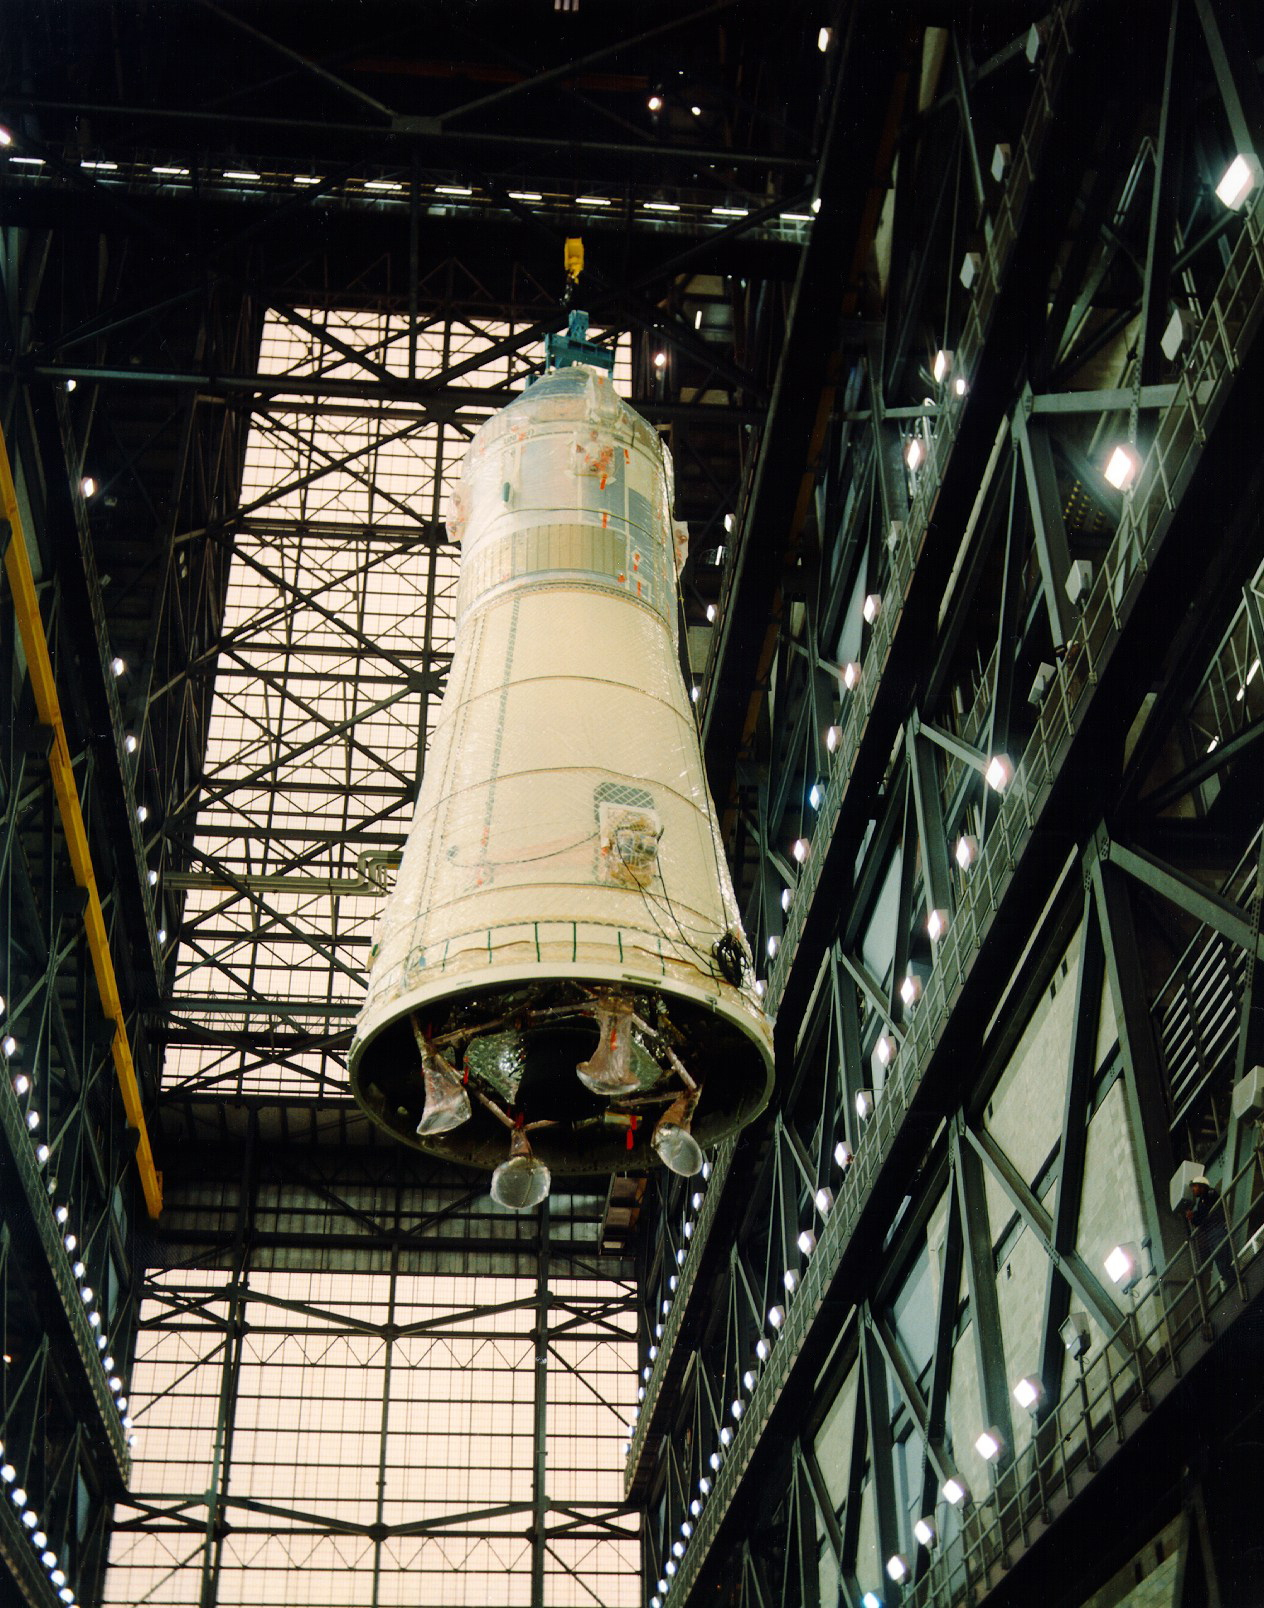 Workers lift the spacecraft for stacking onto the rocket, the footpads of the LM’s folded landing gear visible